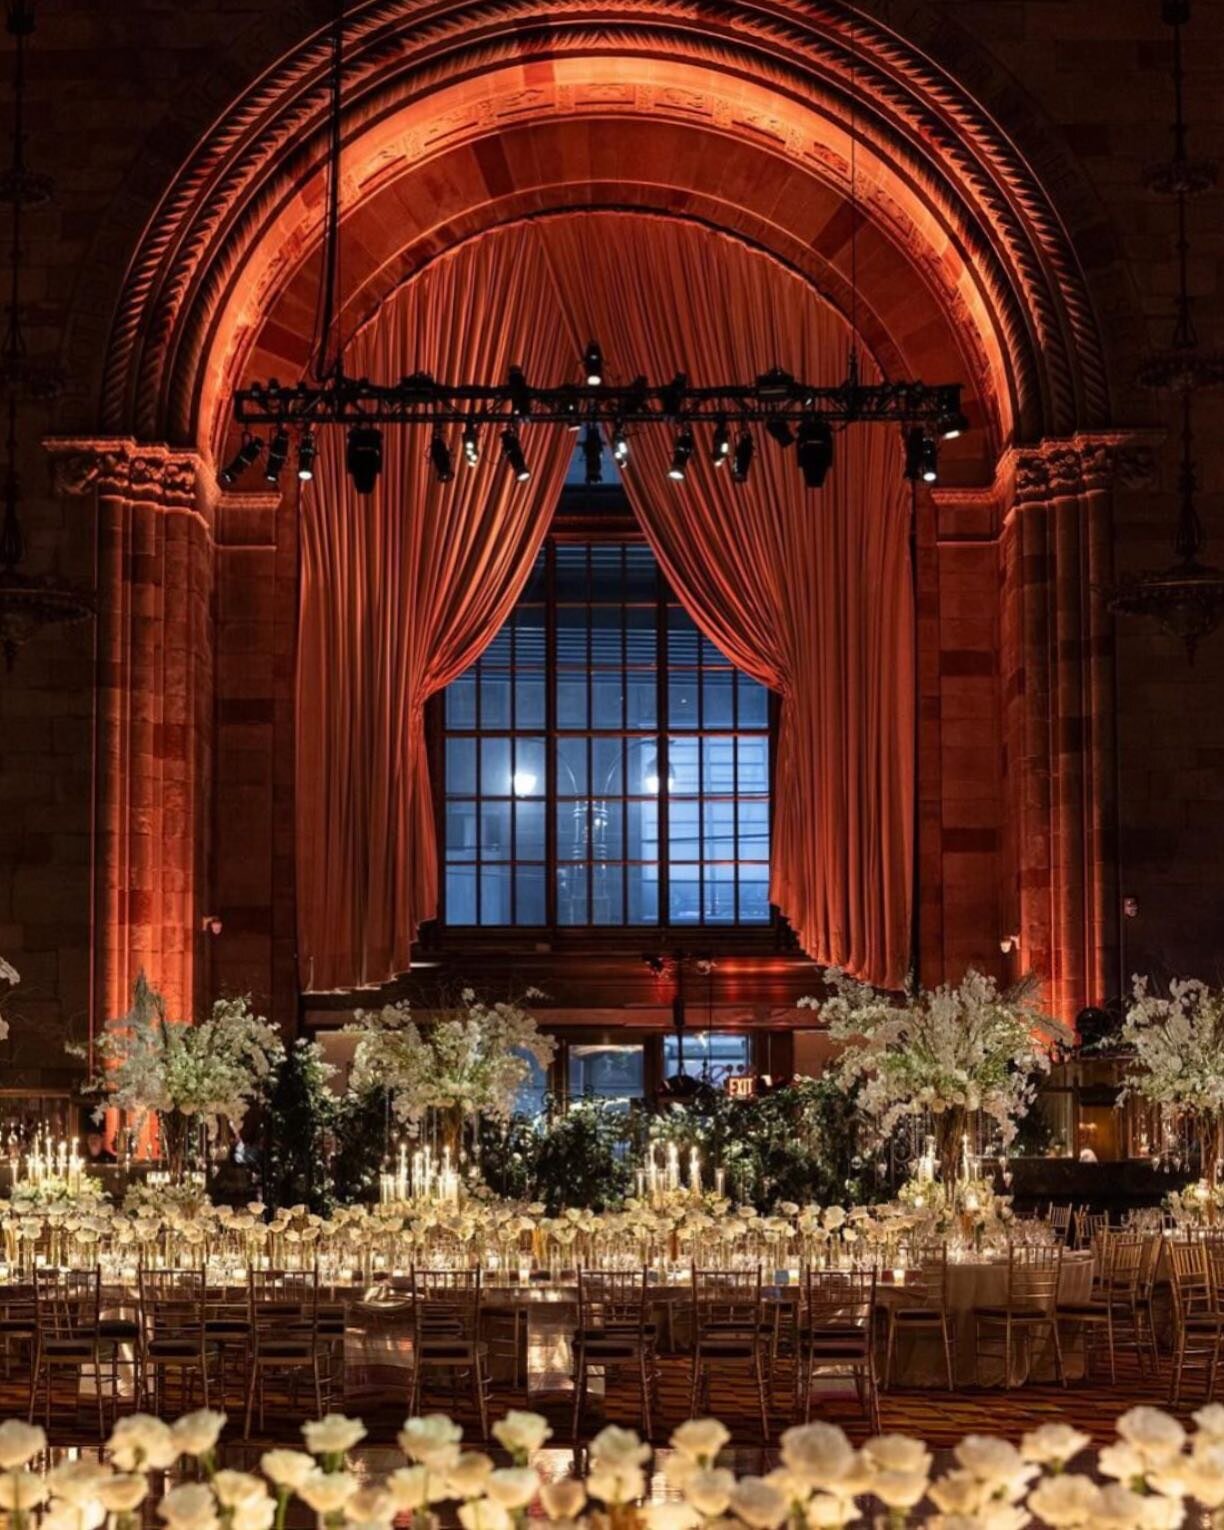 We are experts in breathtaking design and excellent execution. Visit the link in our bio to learn more today 🥂

Event Planning &amp; Design: @stateoftheartny
Photographer: @rafalostrowski
Videographer: @knottyartstudio
D&eacute;cor: @konstantinosflo